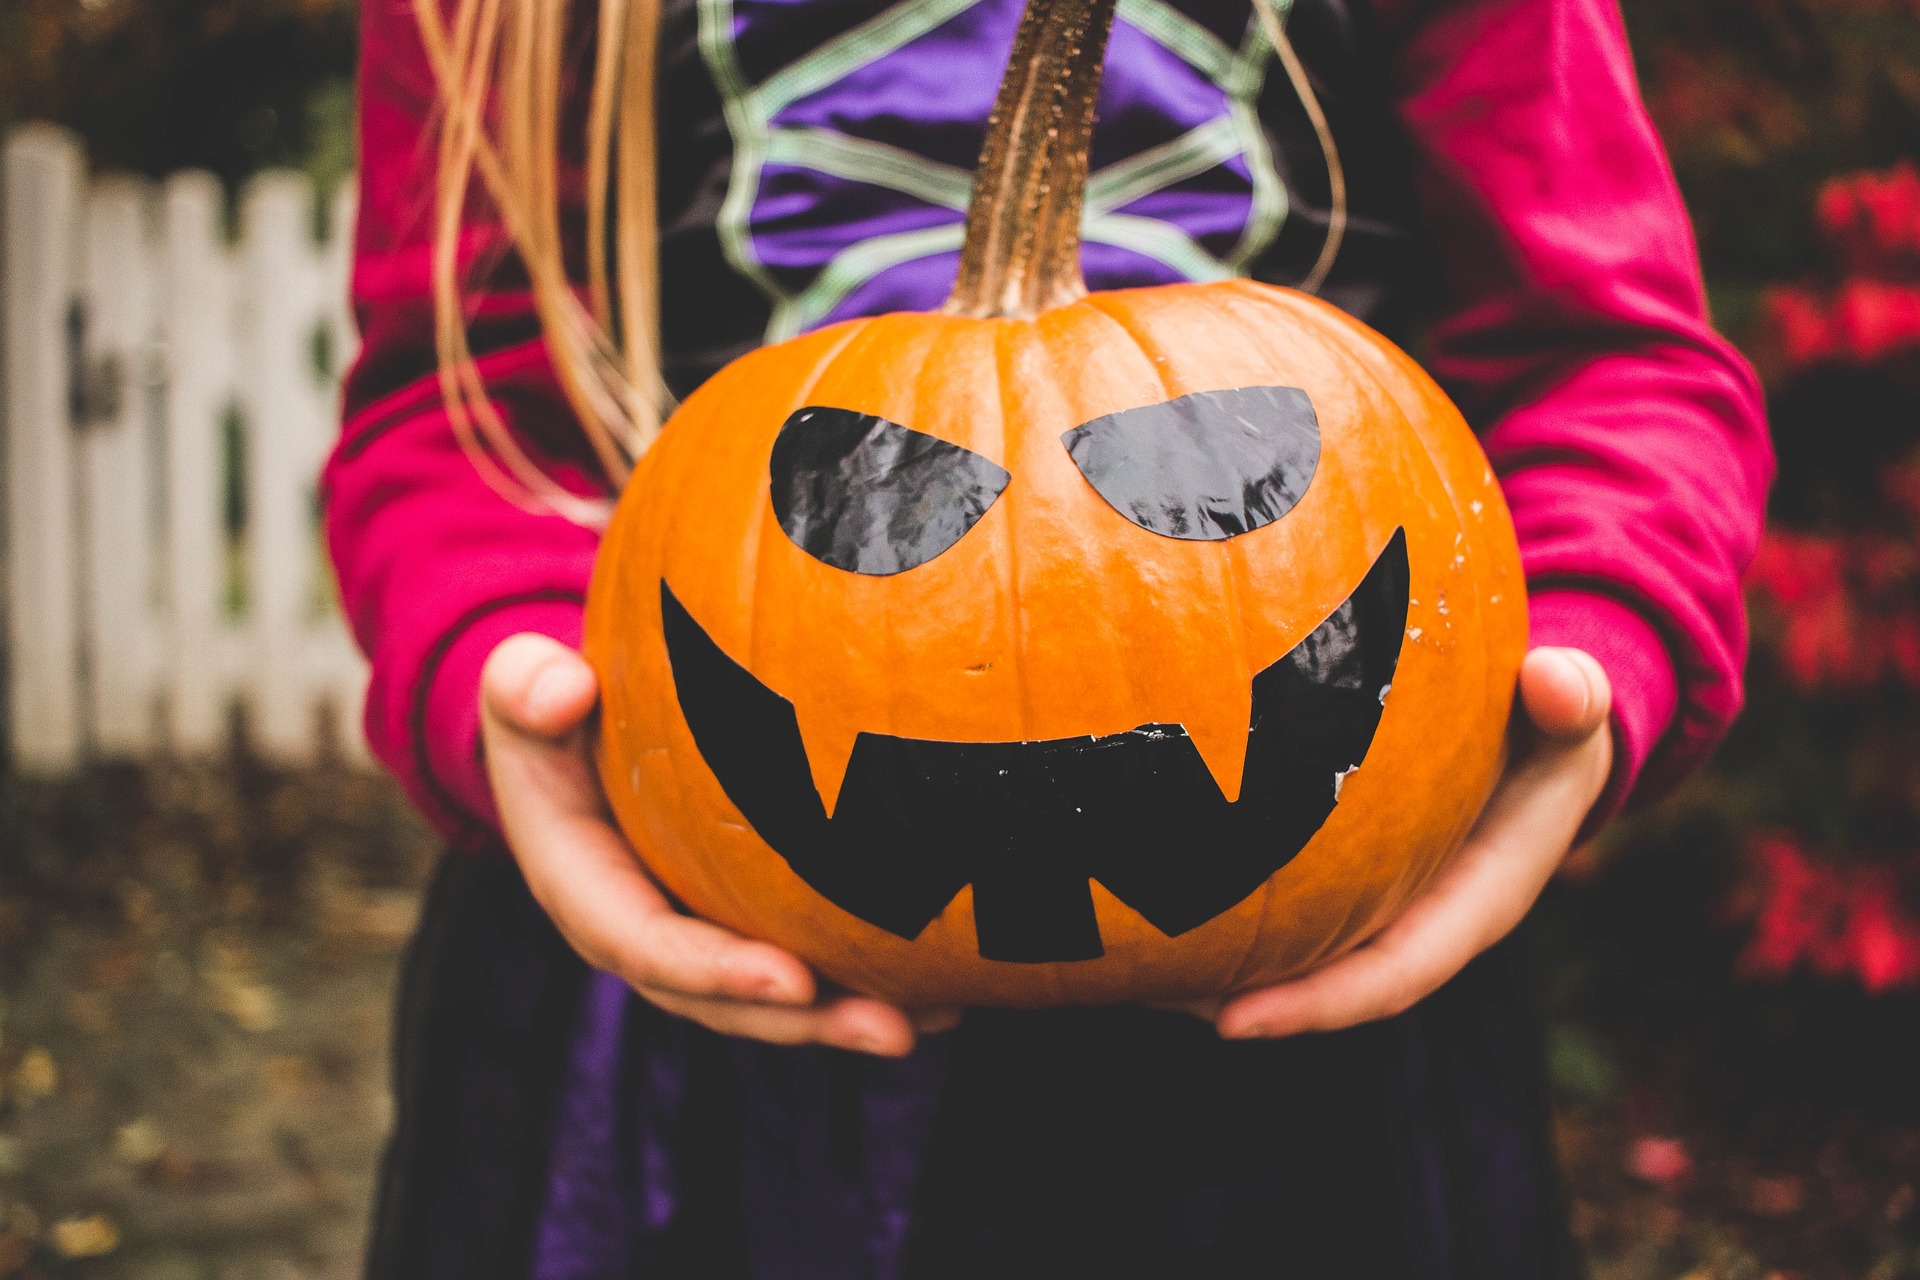 Celebrate Halloween Spooktacular at Savannah Center, donate to help hungry